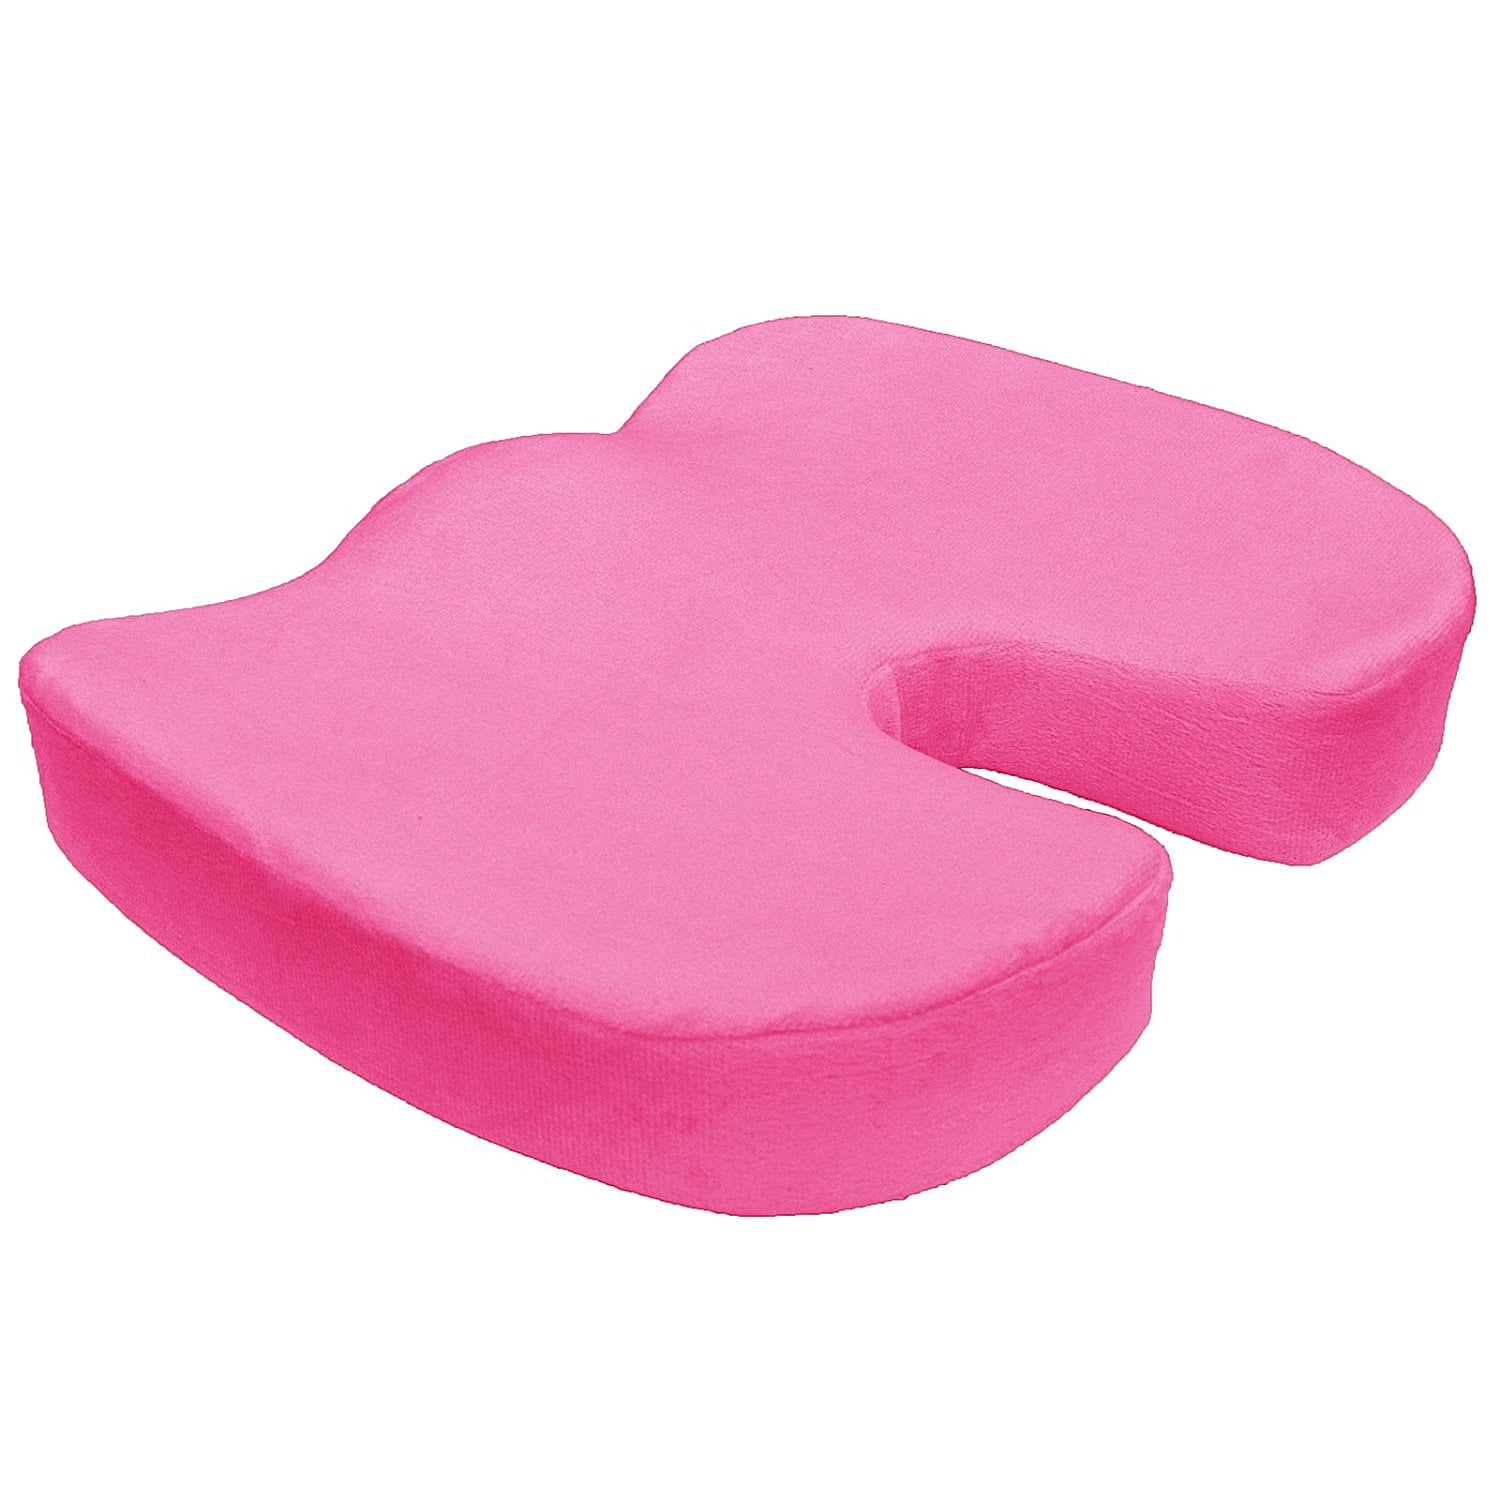 Soft Memory Foam Coccyx Seat Cushion Support Pillow Sciatica Pain Relief Car Office Chair, Size: 17, Pink